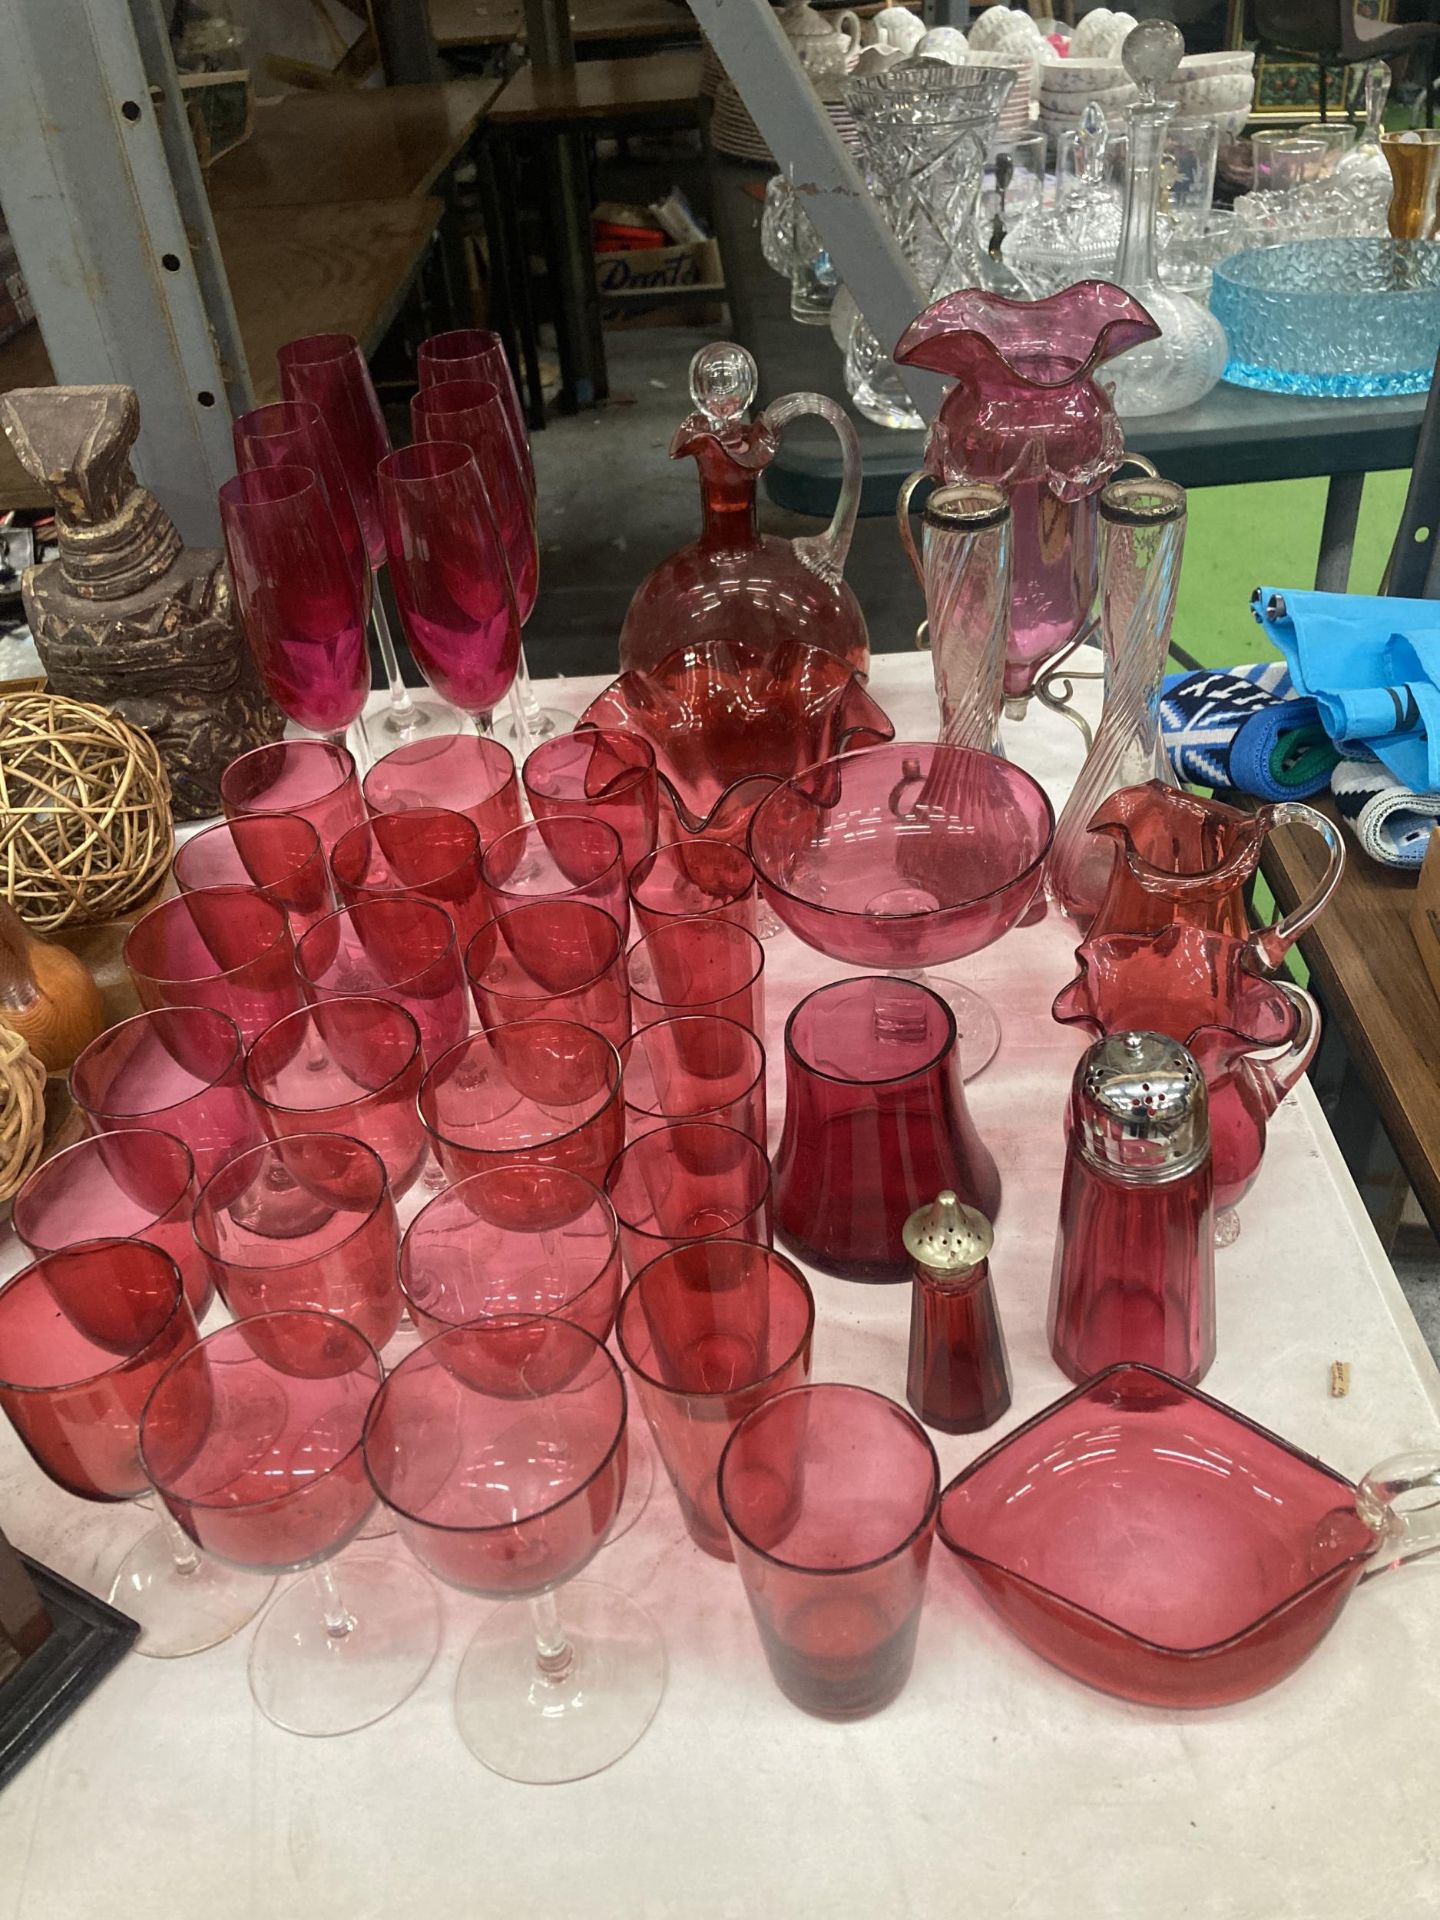 A LARGE QUANTITY OF CRANBERRY GLASS TO INCLUDE DRINKING GLASSES, VASES, JUGS, DECANTER, ETC.,